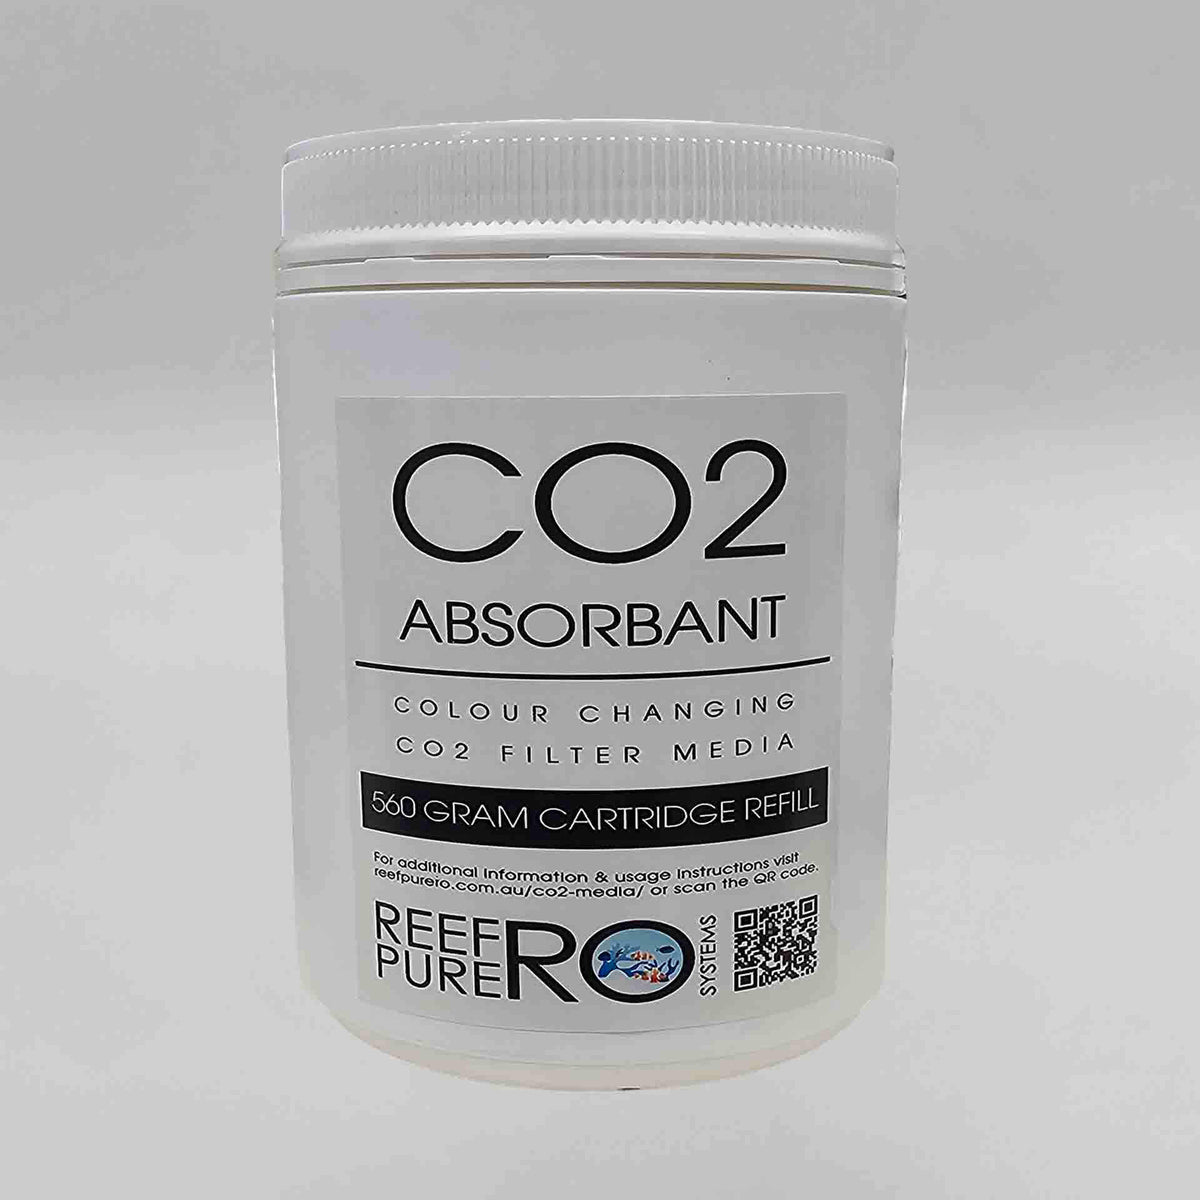 Reef Pure Ro Systems Colour Changing CO2 Media 560g